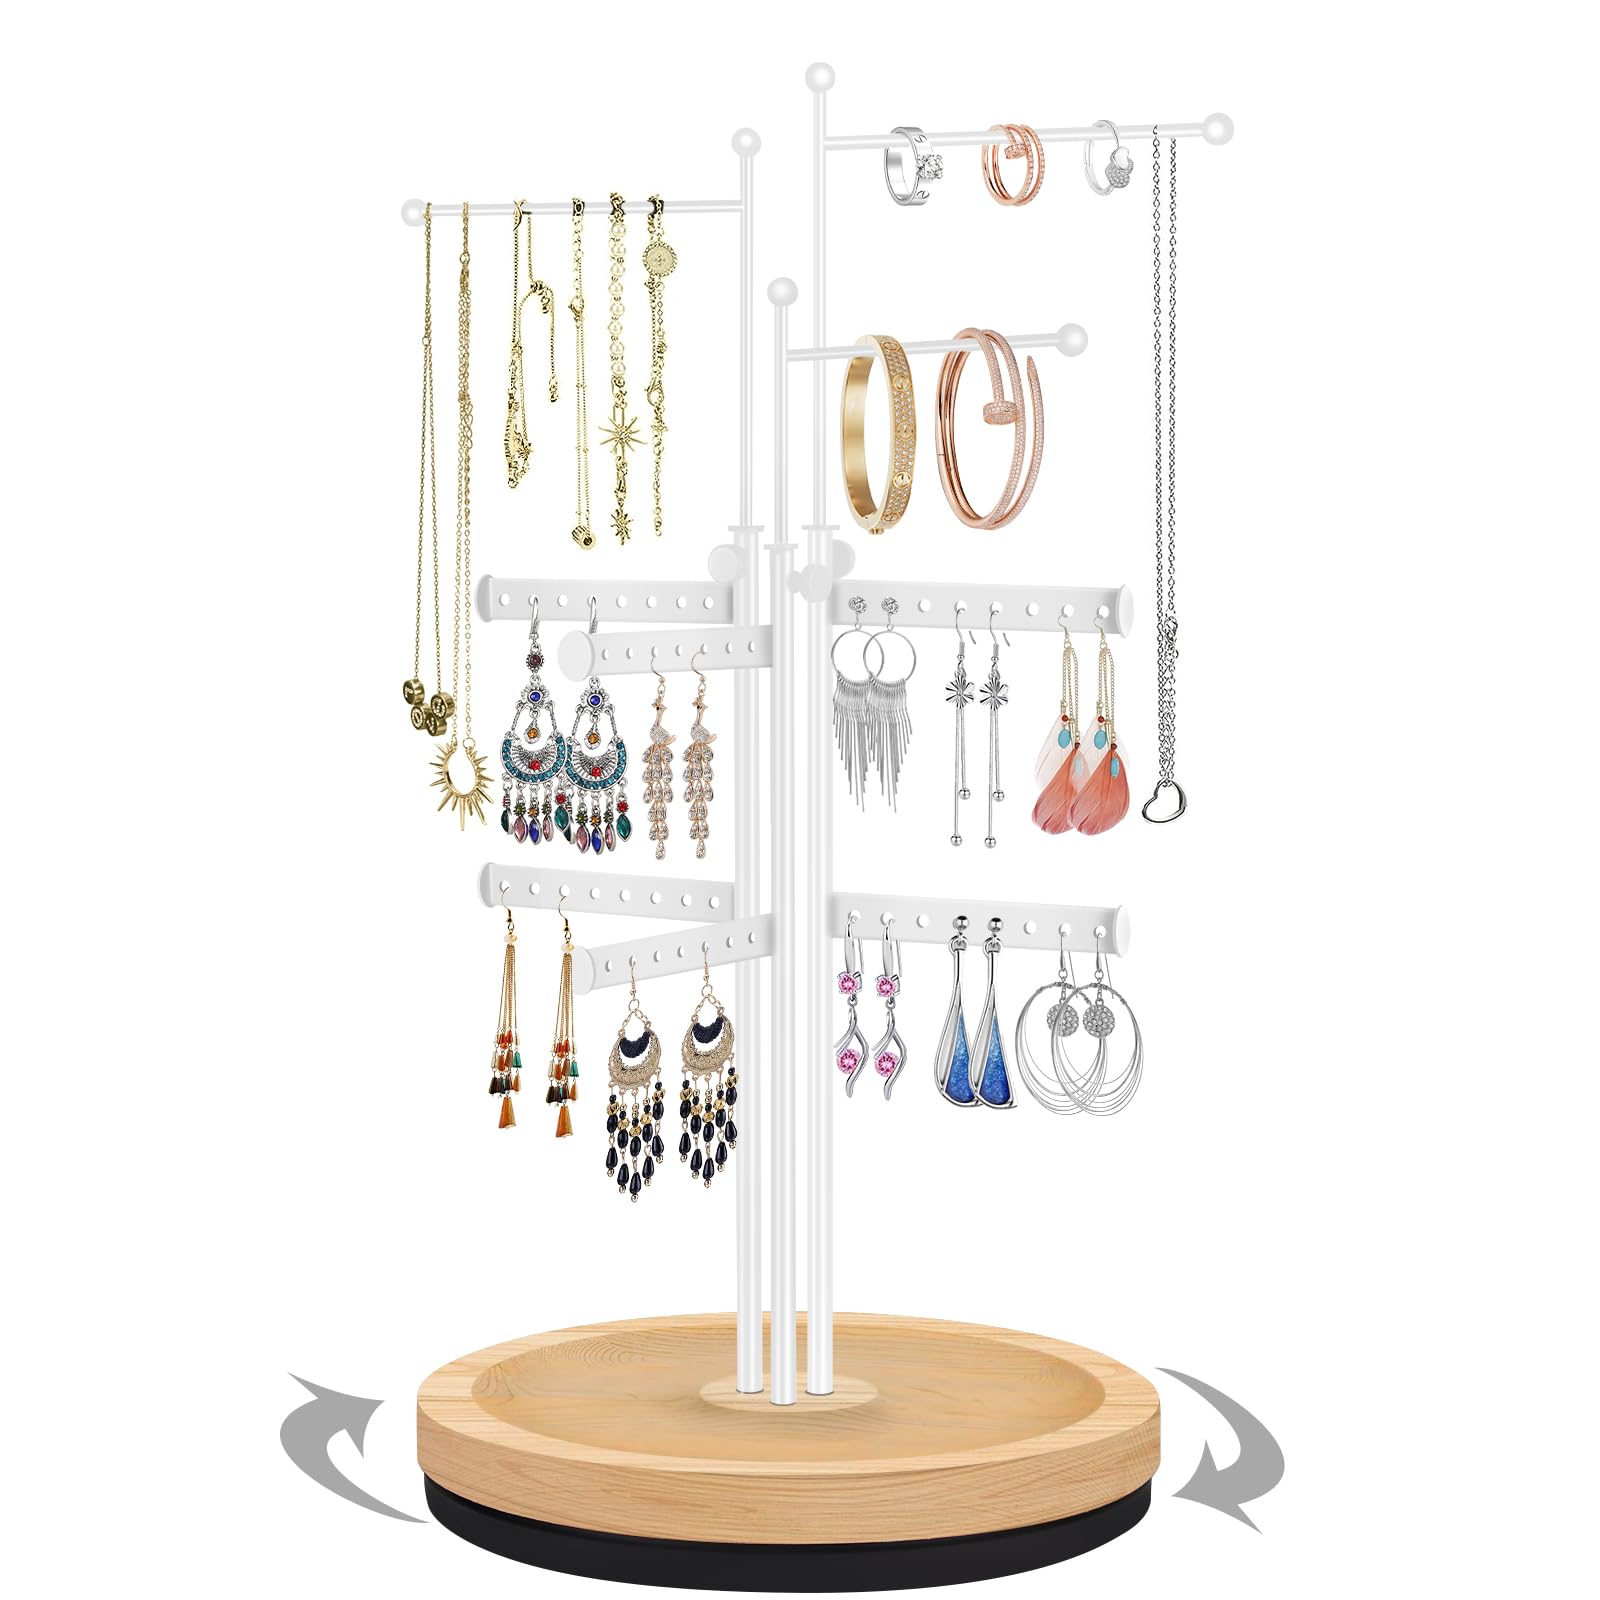 penobon Jewelry Holder Organizer with Wood Base, Adjustable Height Jewelry Display Holder Stand, Metal Rotating Earring Holder O